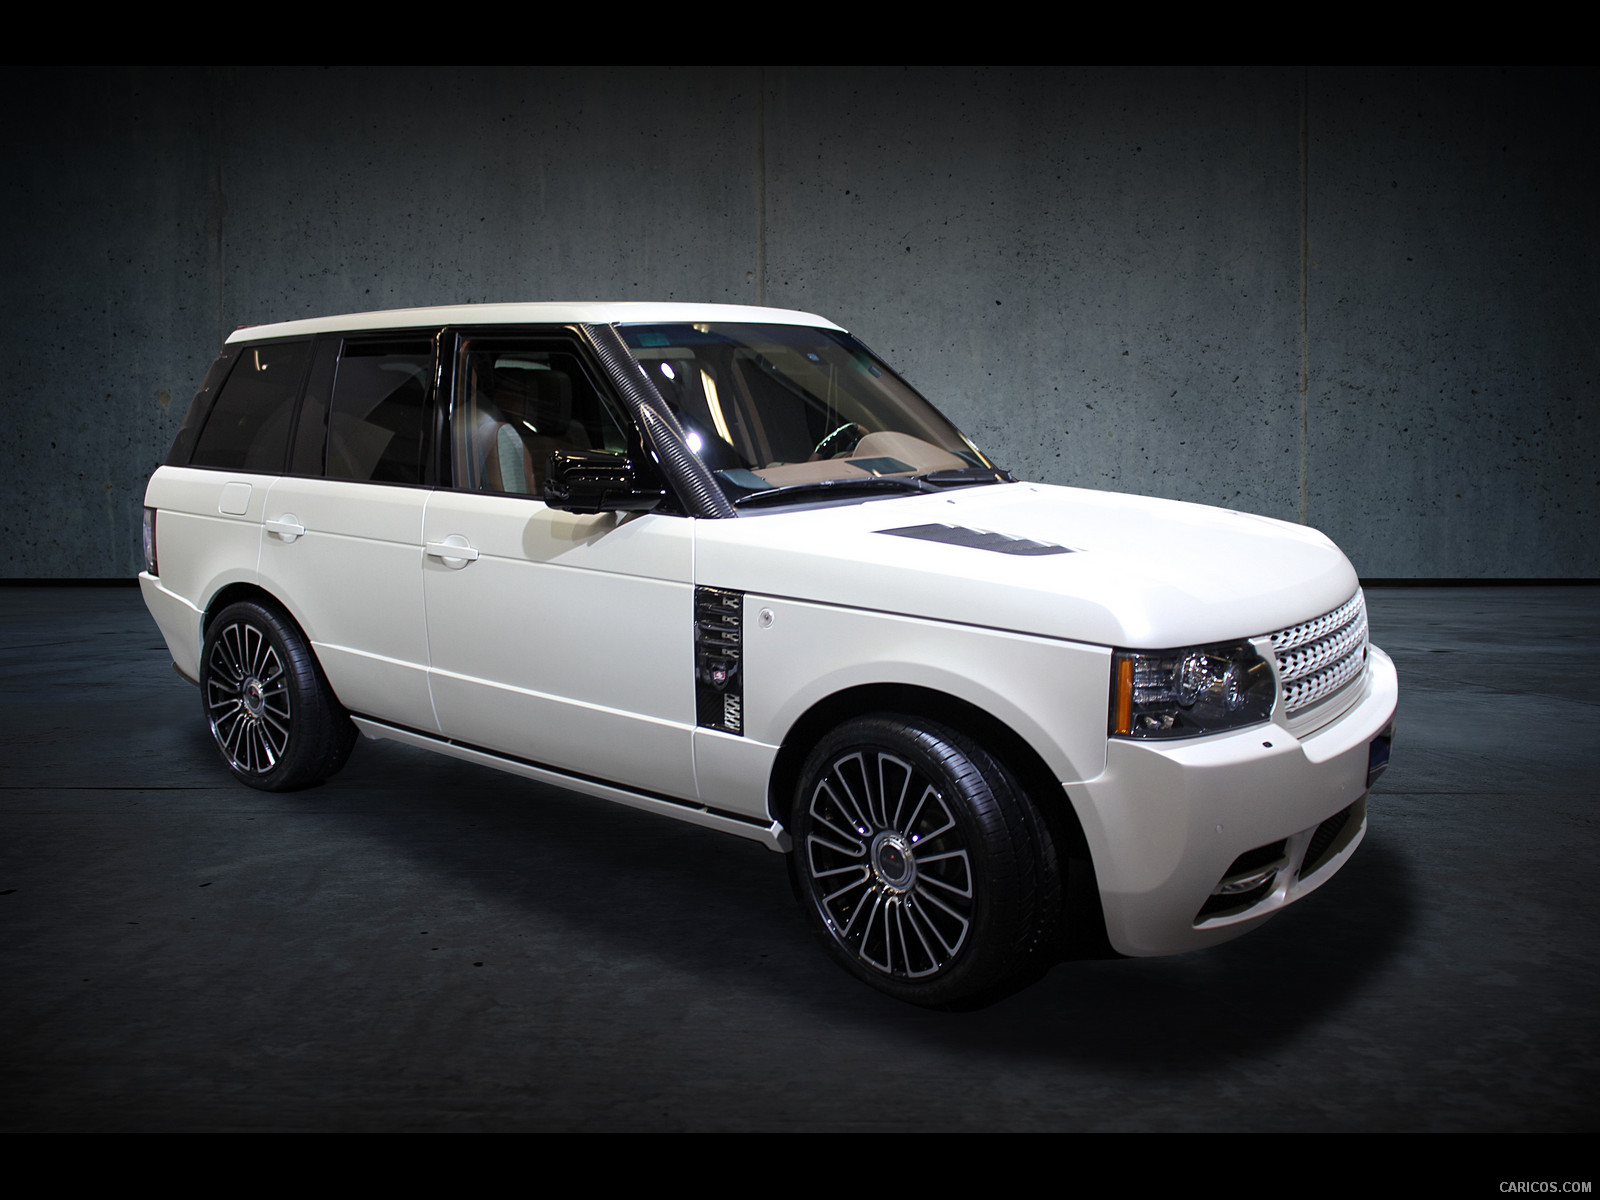 2011 Mansory Range Rover Vogue  - Front, #1 of 4